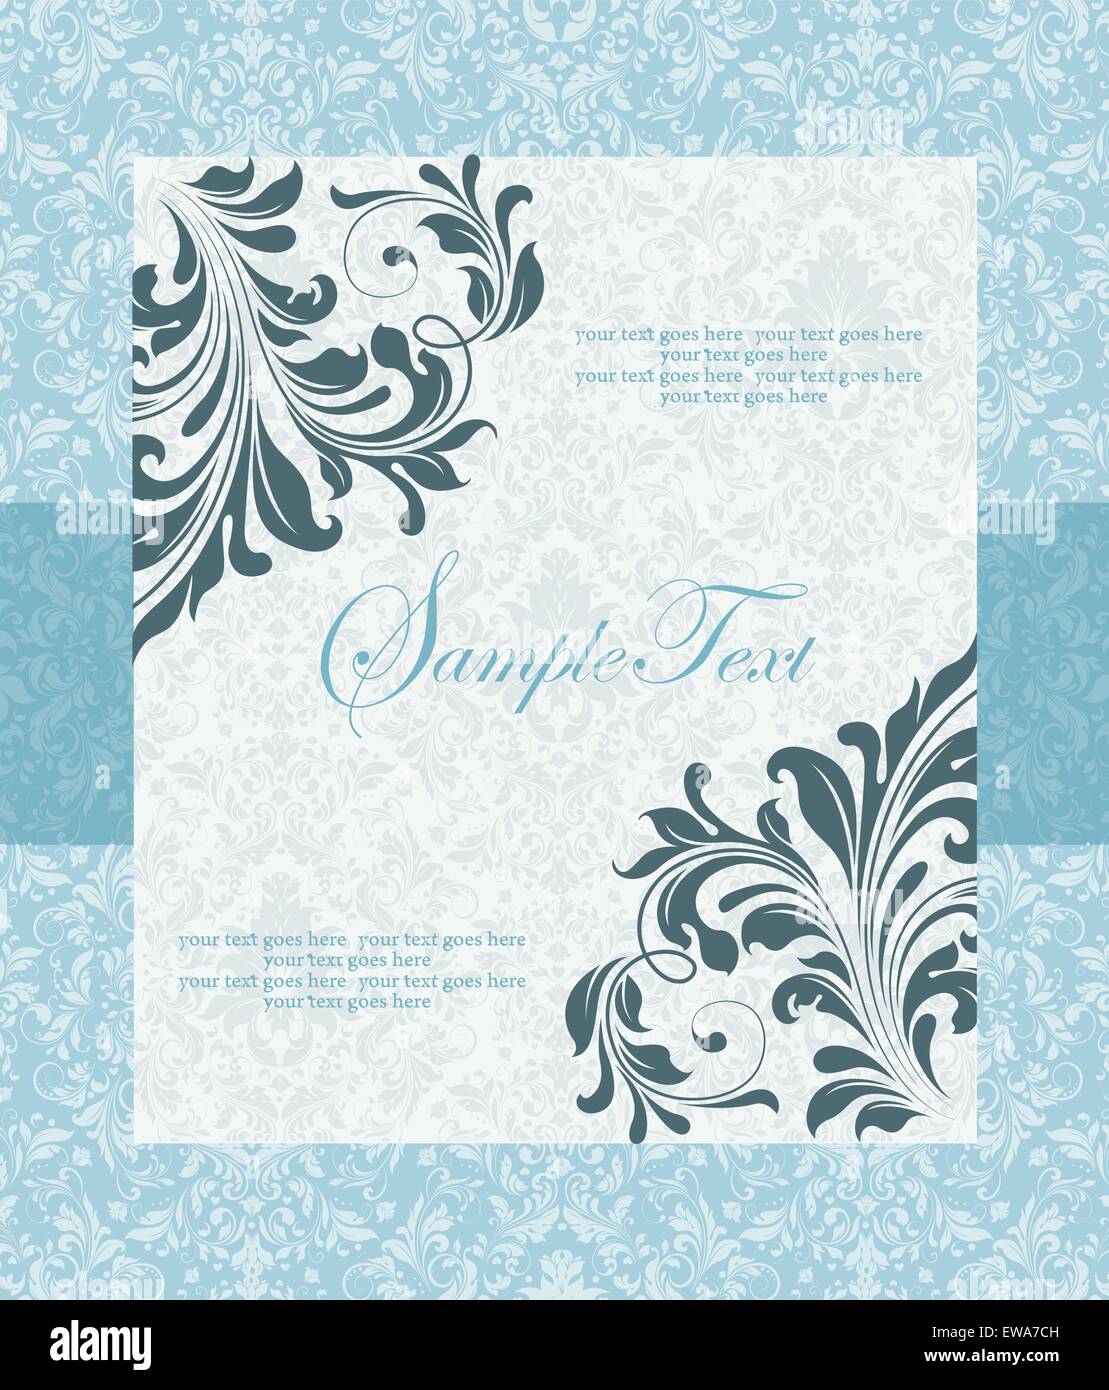 Vintage invitation card with ornate elegant retro abstract floral design, teal blue leaves on light blue background with frame Stock Vector